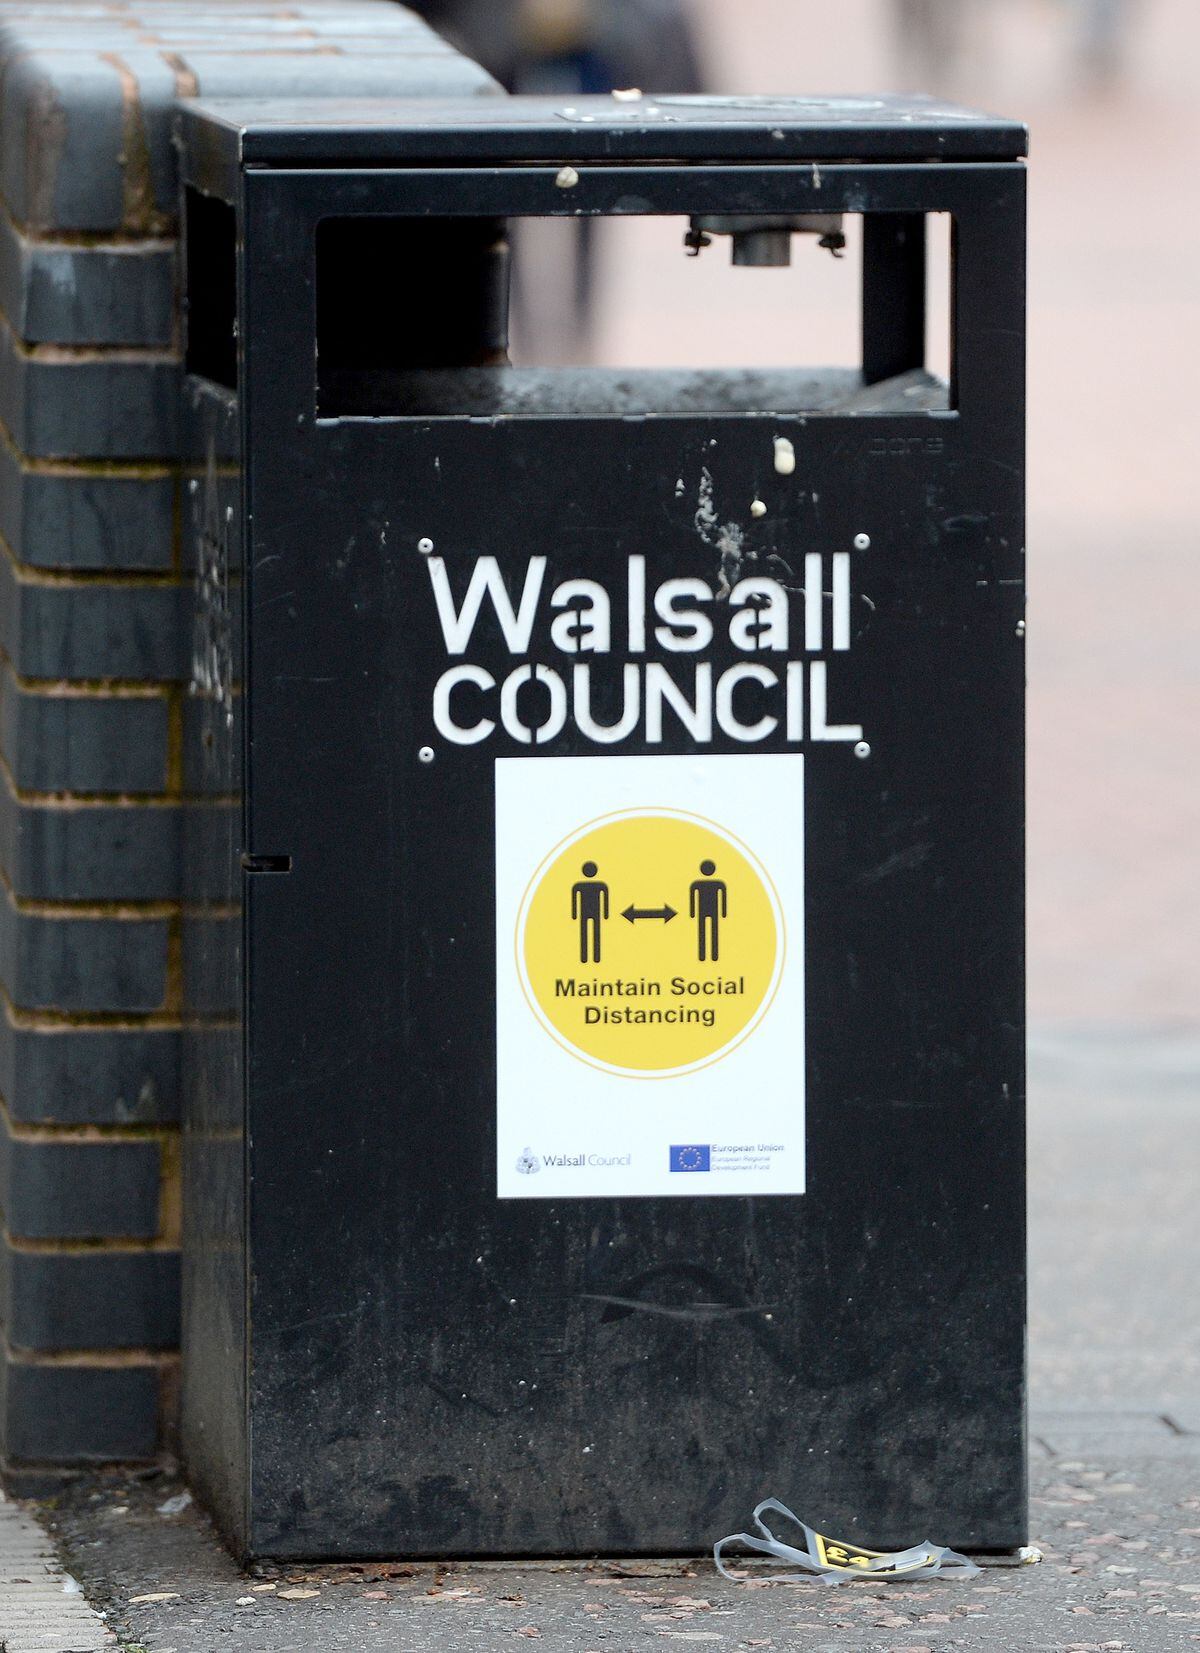 A new social distancing message on a Walsall Council bin